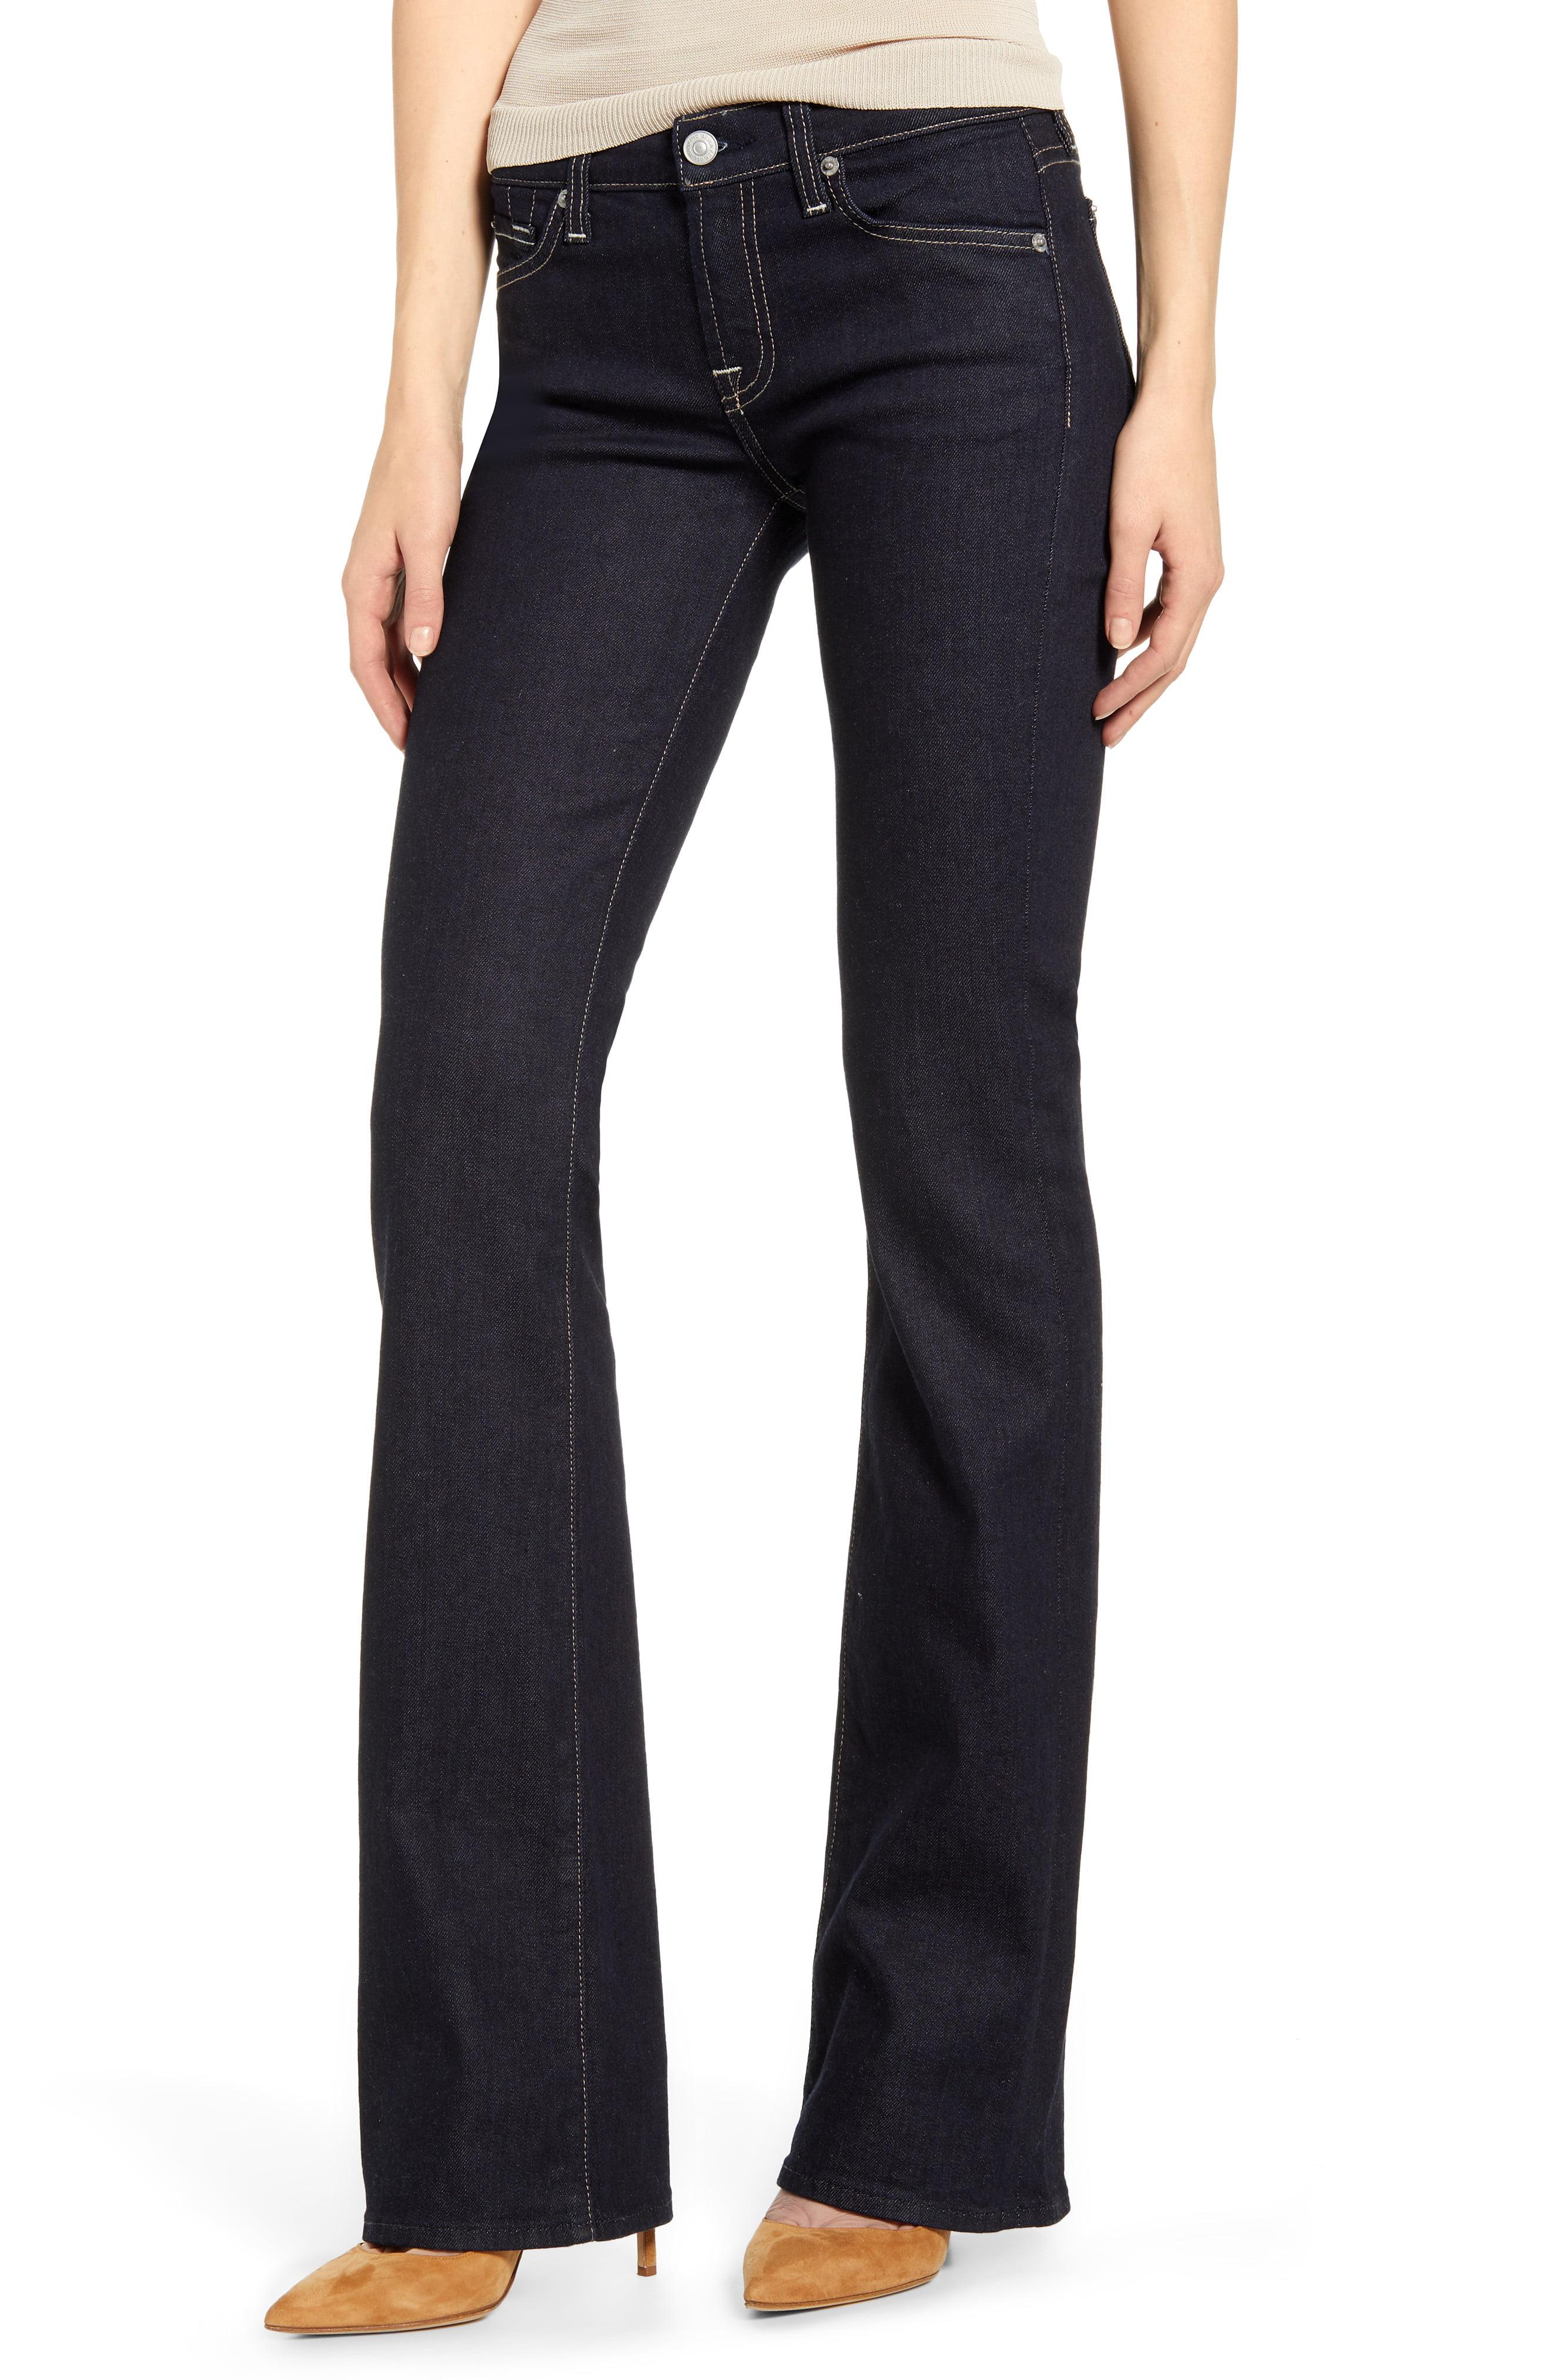 7 For All Mankind Denim 7 For All Mankind Original Bootcut Jeans in ...